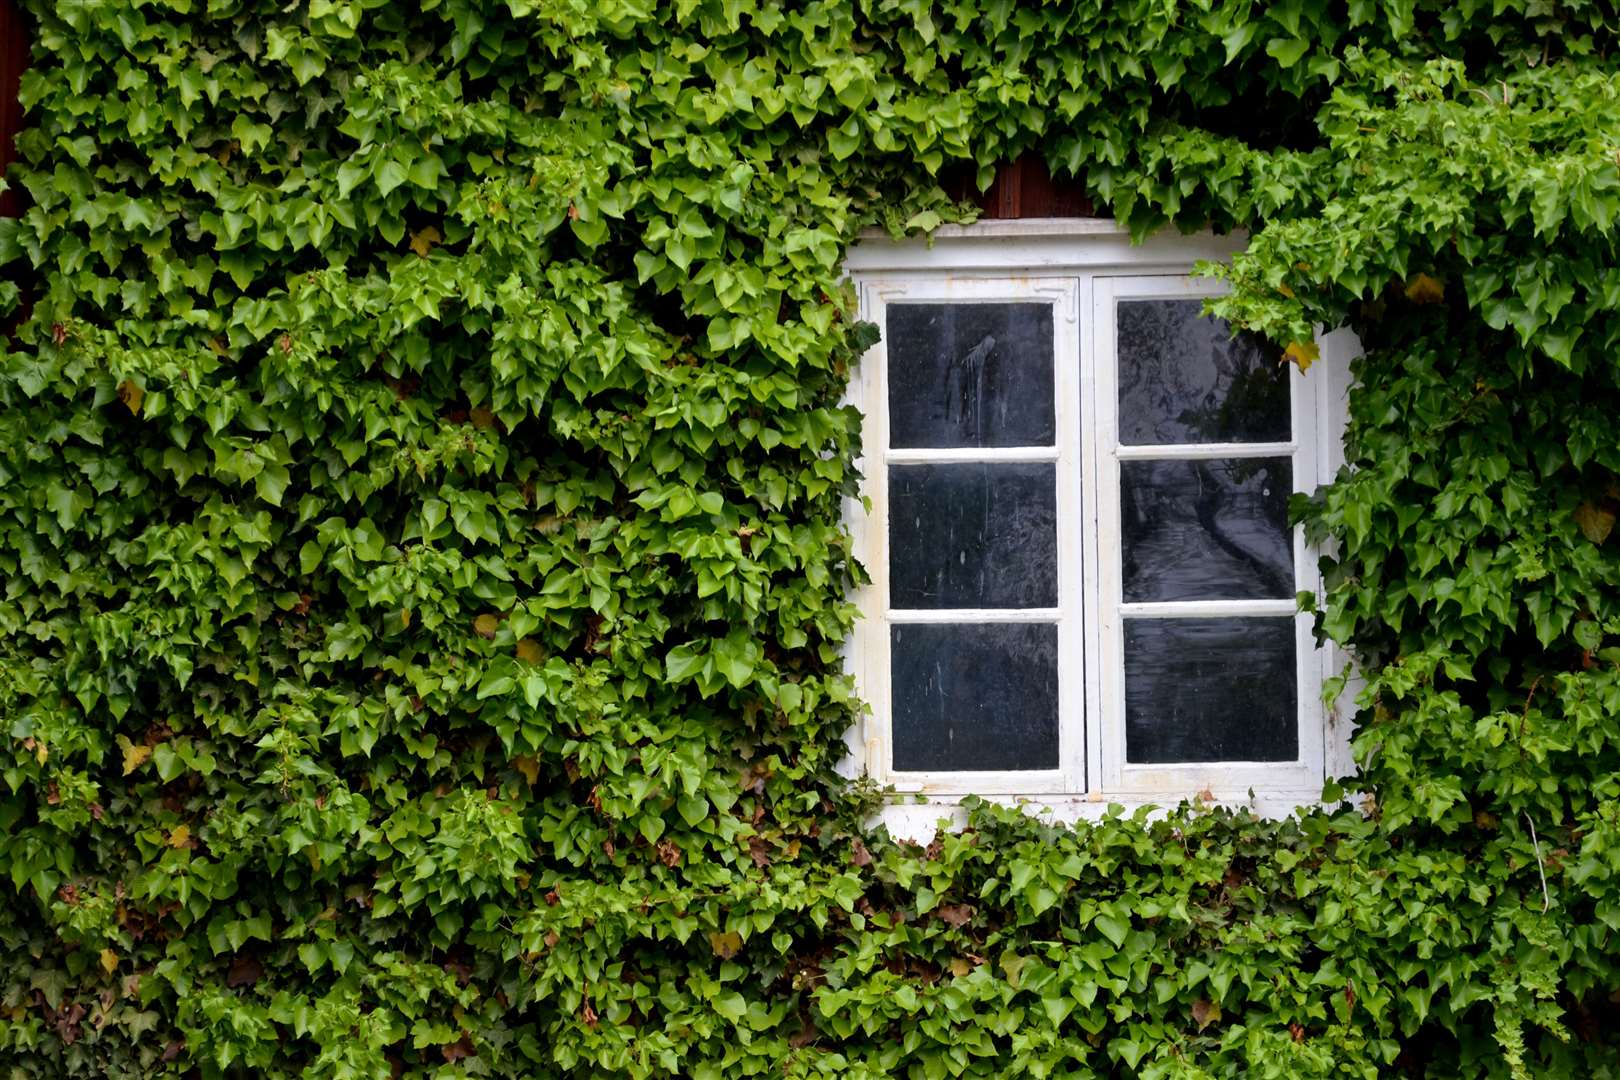 Ivy is easy to take down but can grow rapidly. Photo: Svitlana Tytska/ Shutterstock